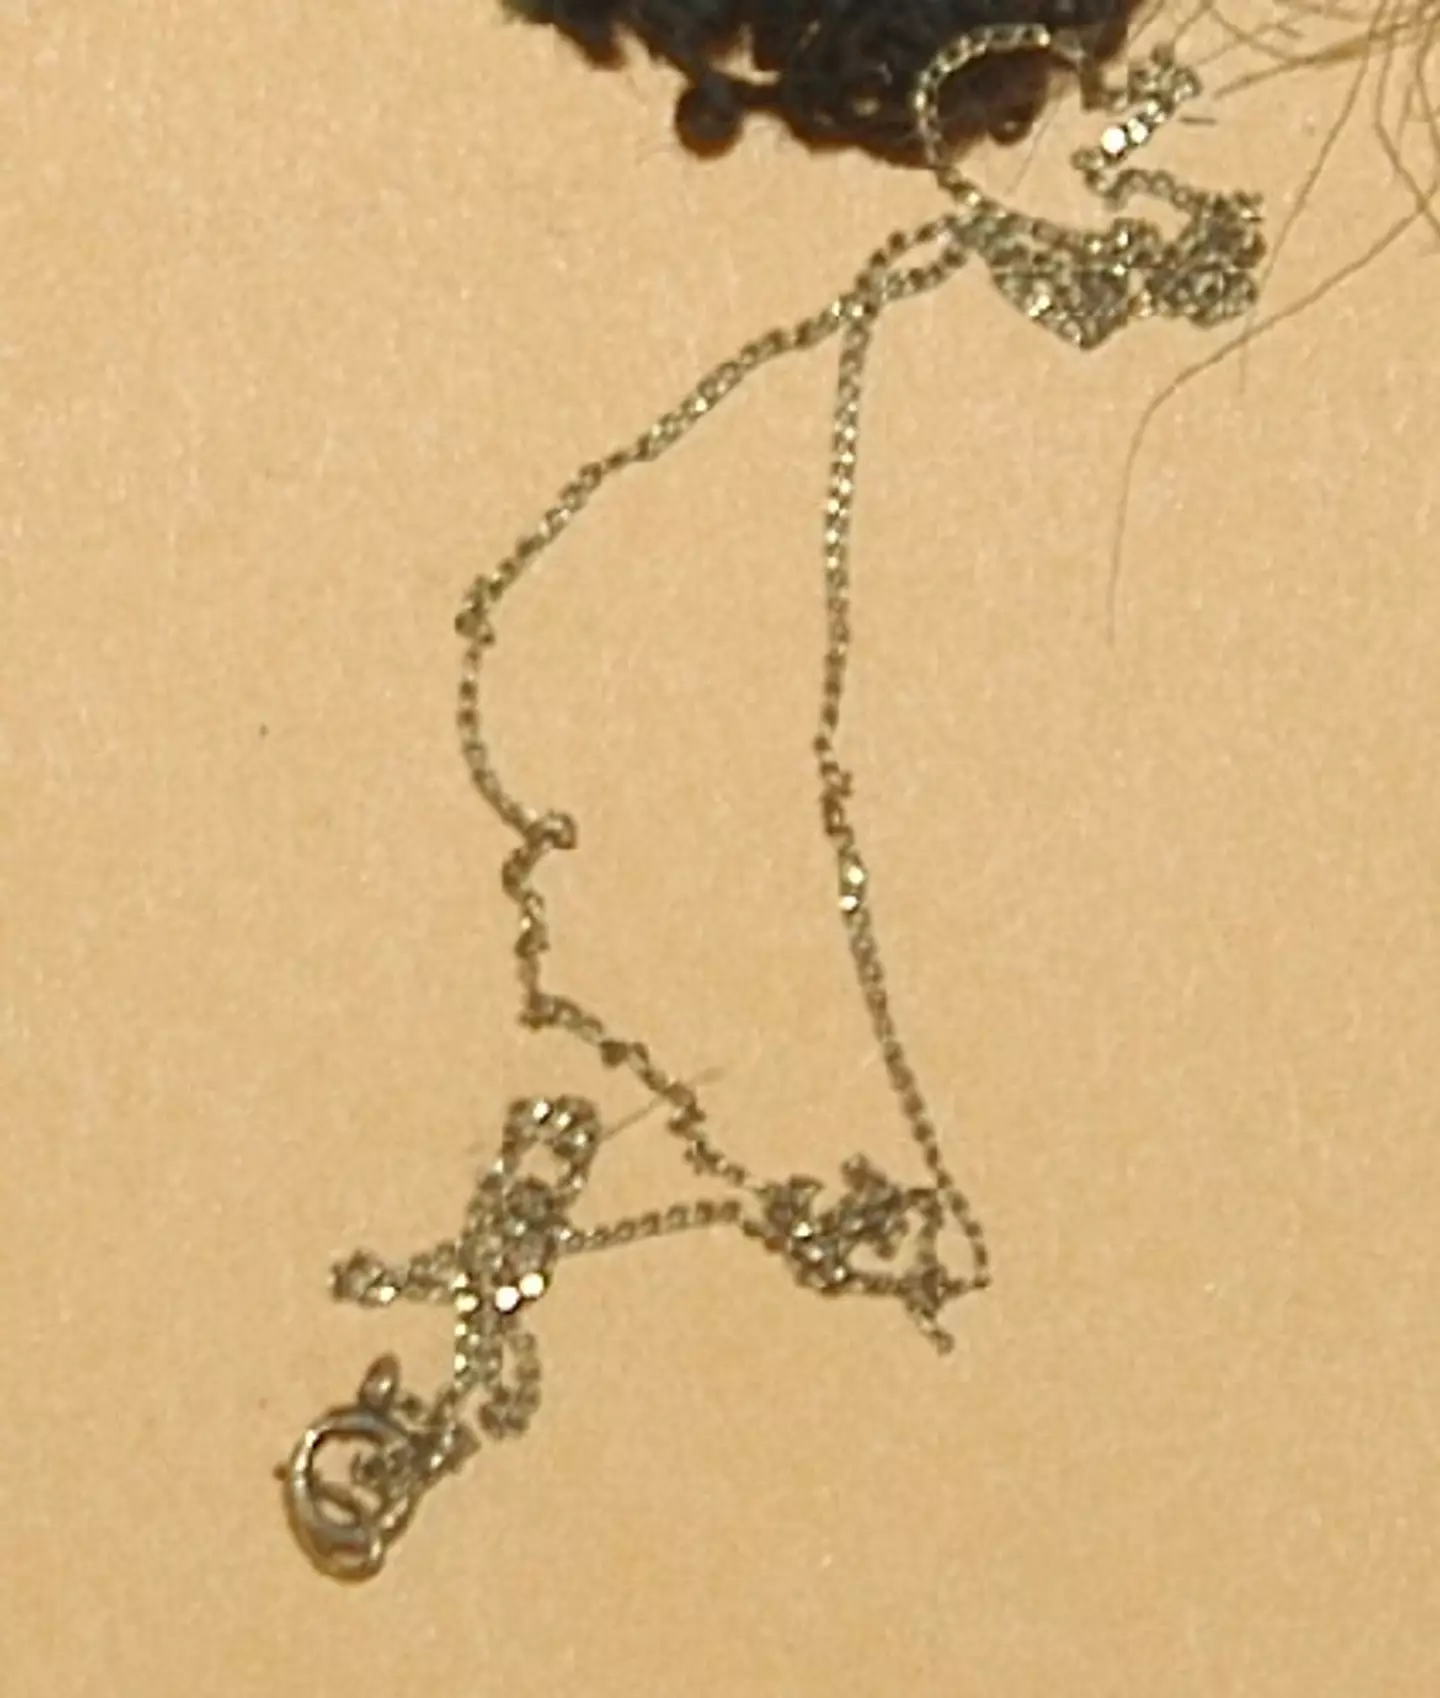 A necklace found at the scene.